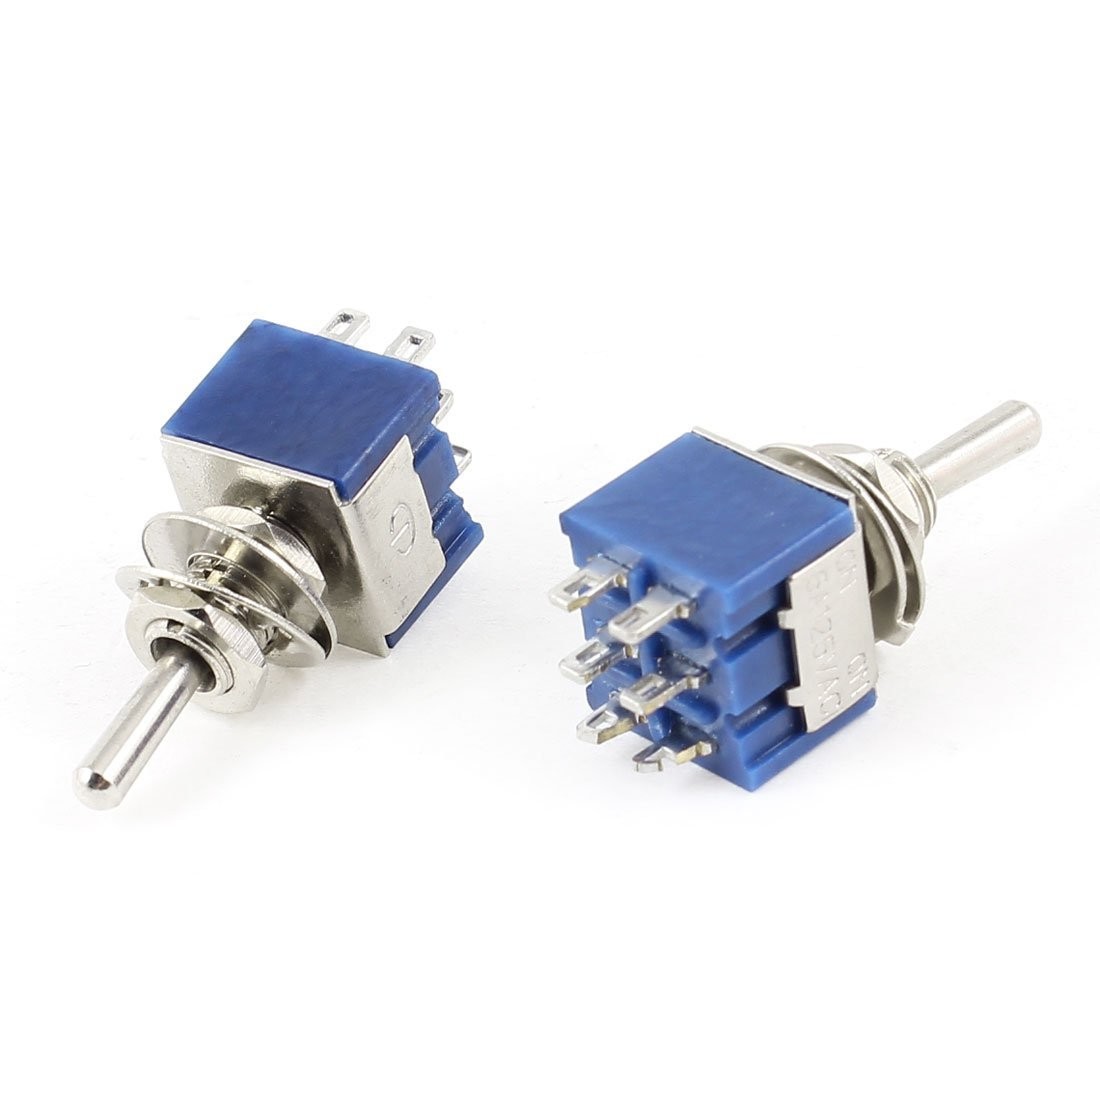 Details about   5PCS 6P Toggle Switch 6A 125VAC 6 Pin DPDT ON-ON Mini Toggle Switc Fad-wufe 